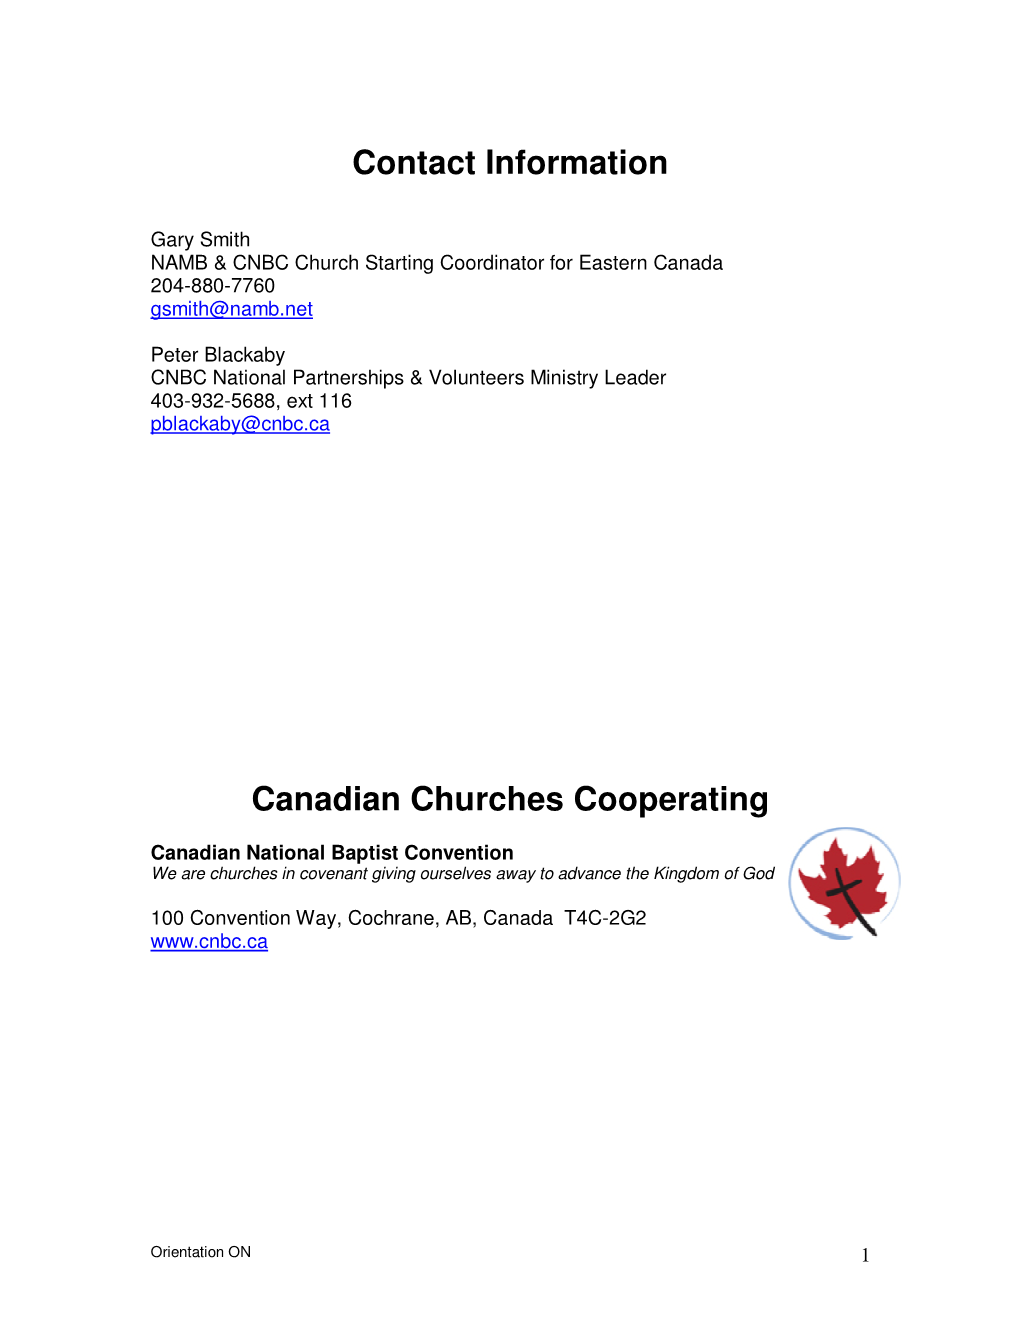 Contact Information Canadian Churches Cooperating